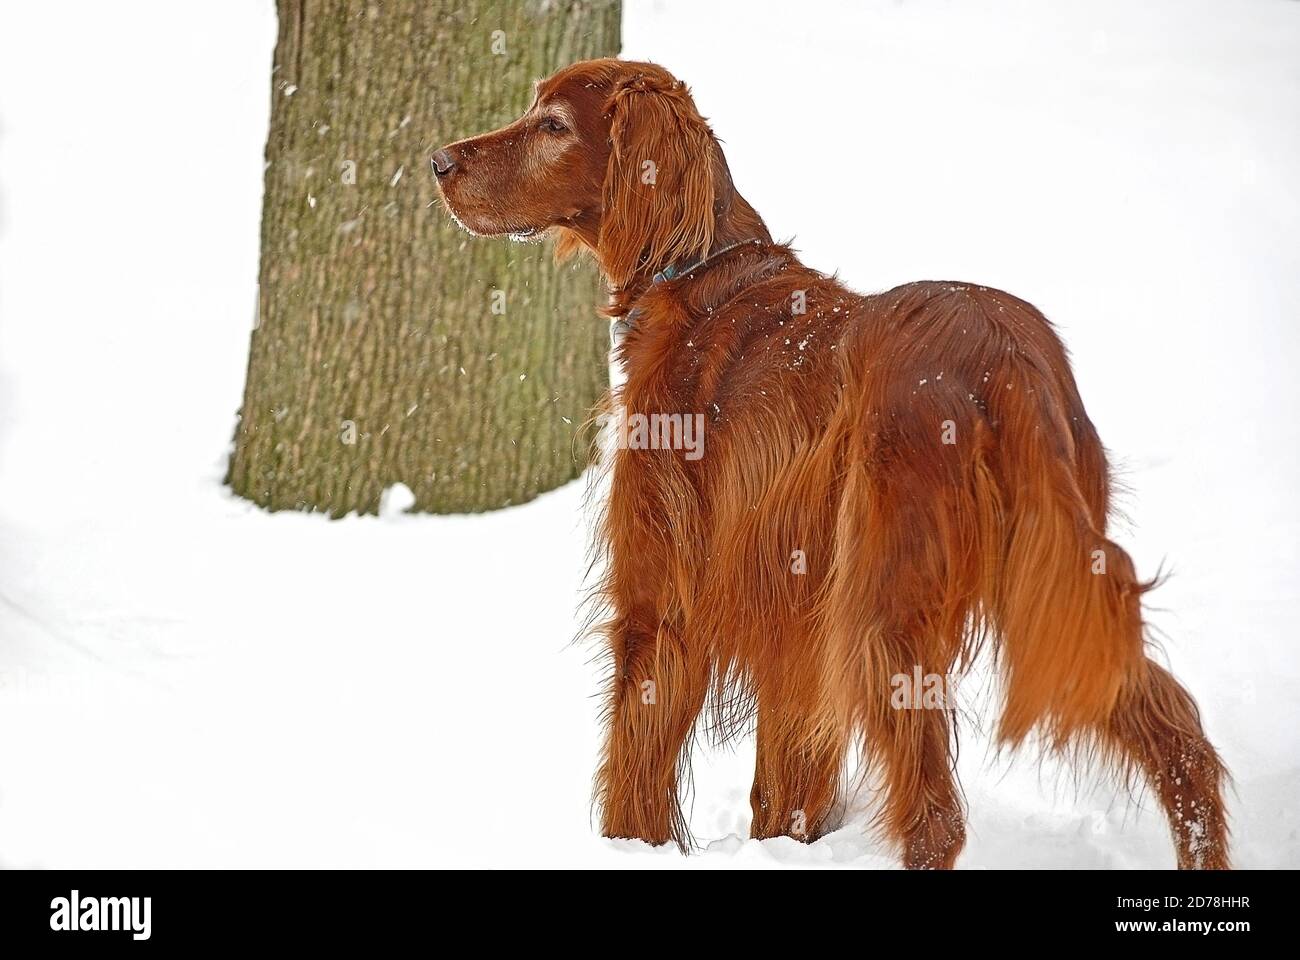 Irish setter in snow by large tree trunk Stock Photo